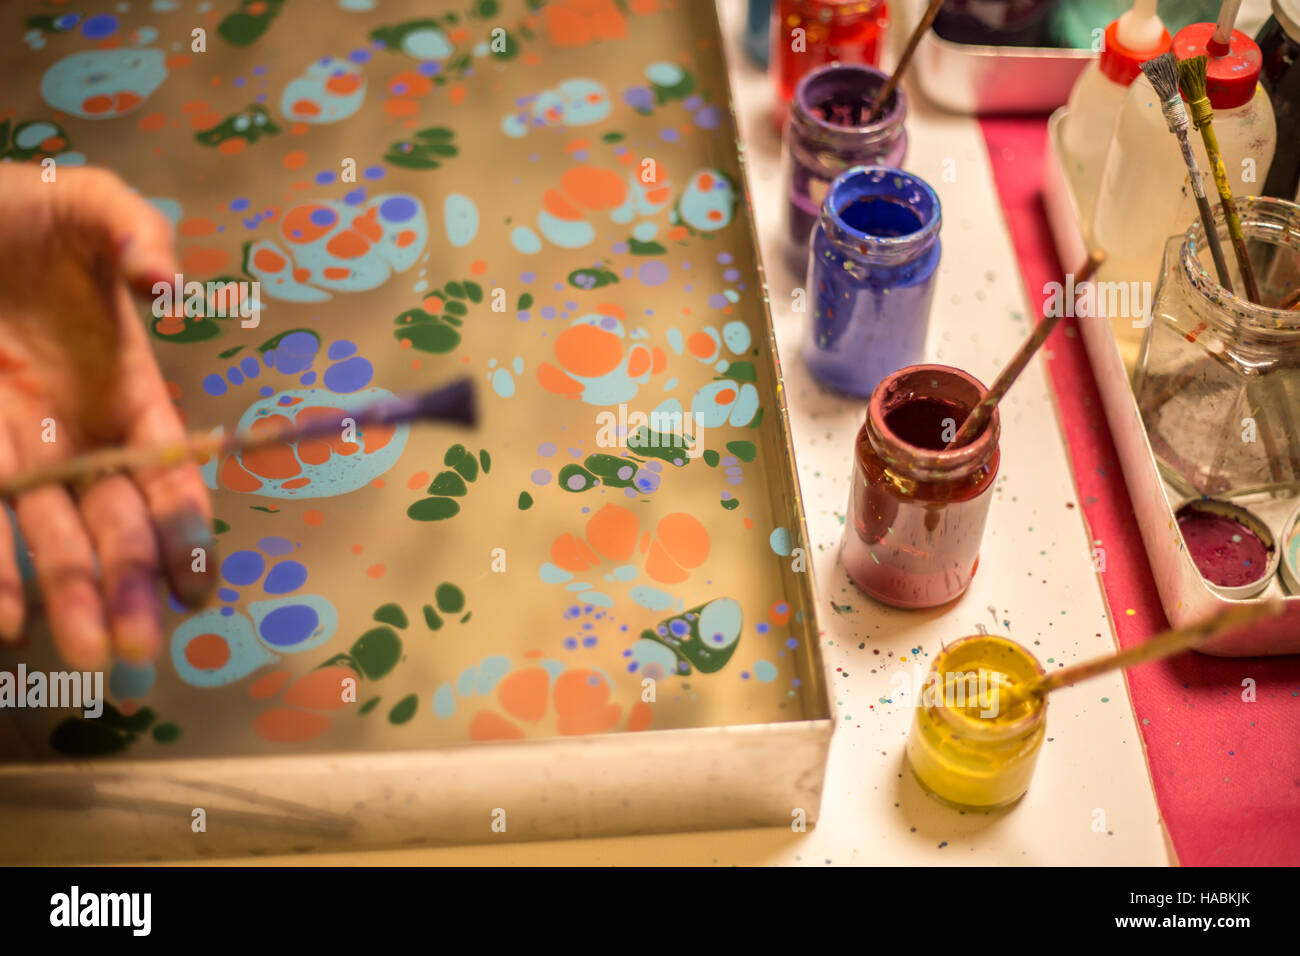 Ebru art or marbling art creation in process. Woman hand sprinkling paint over water and colourful paint bottles standing next to the ebru tray Stock Photo